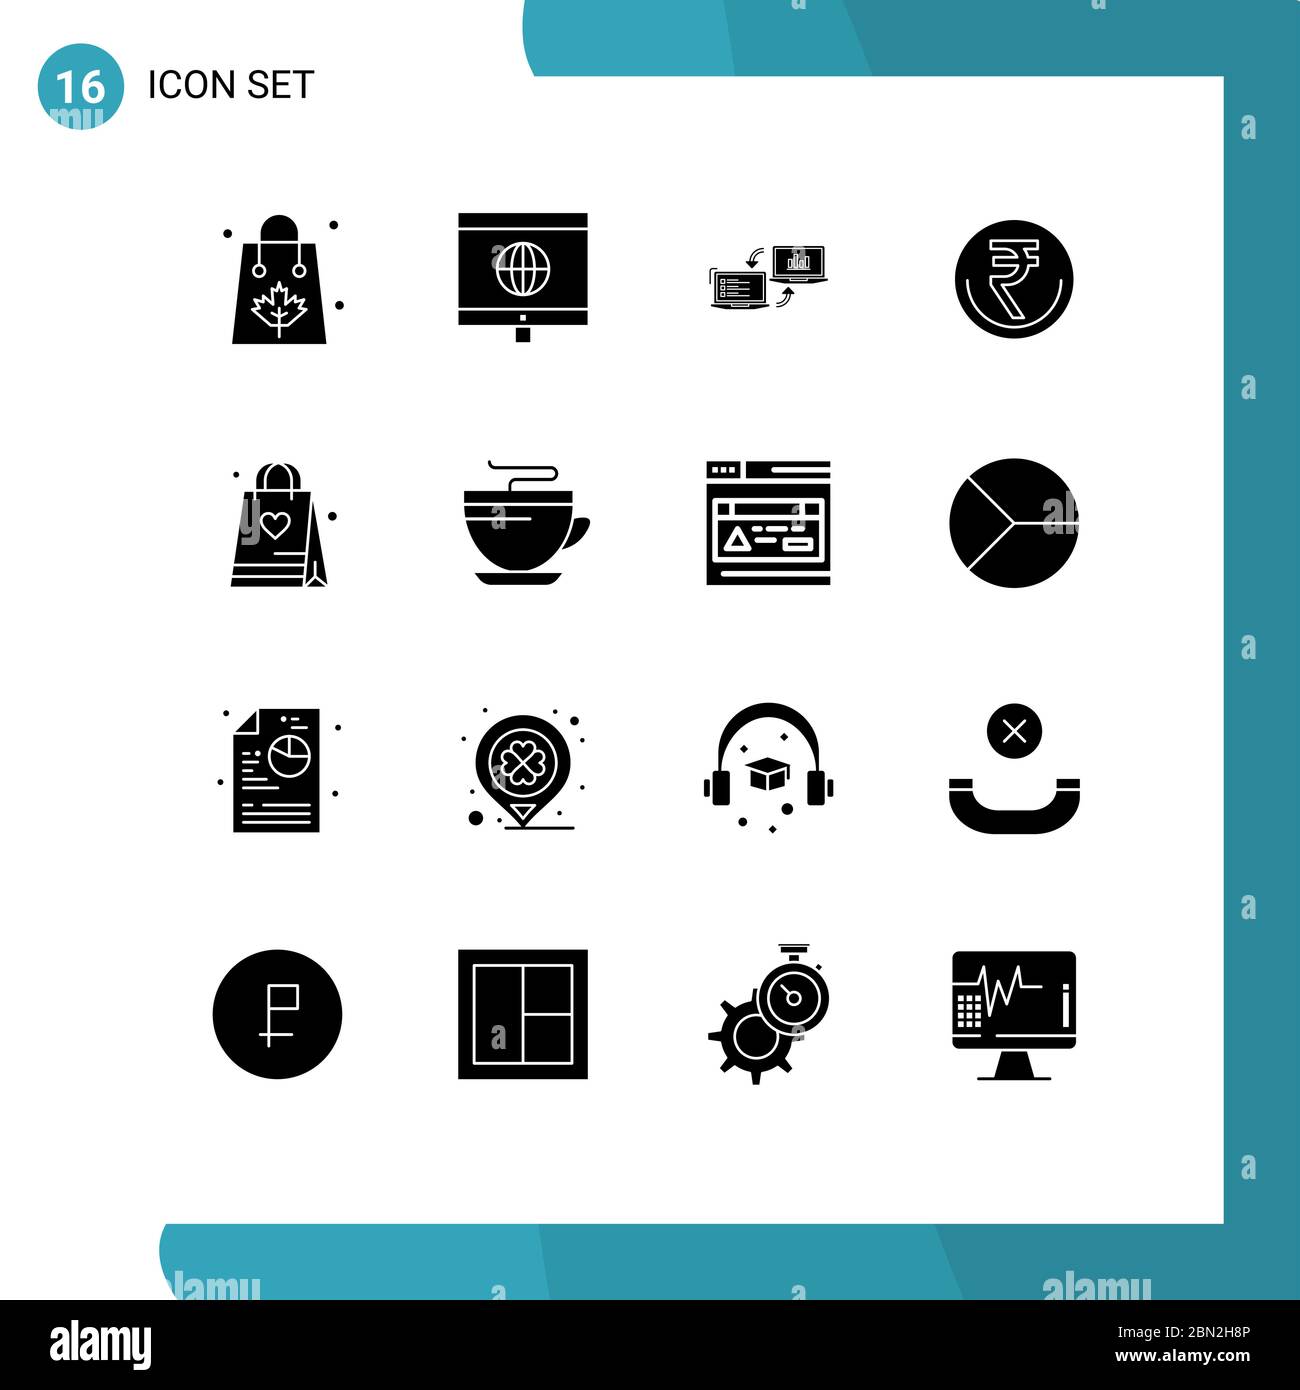 Set Of 16 Modern Ui Icons Symbols Signs For Indian Currency